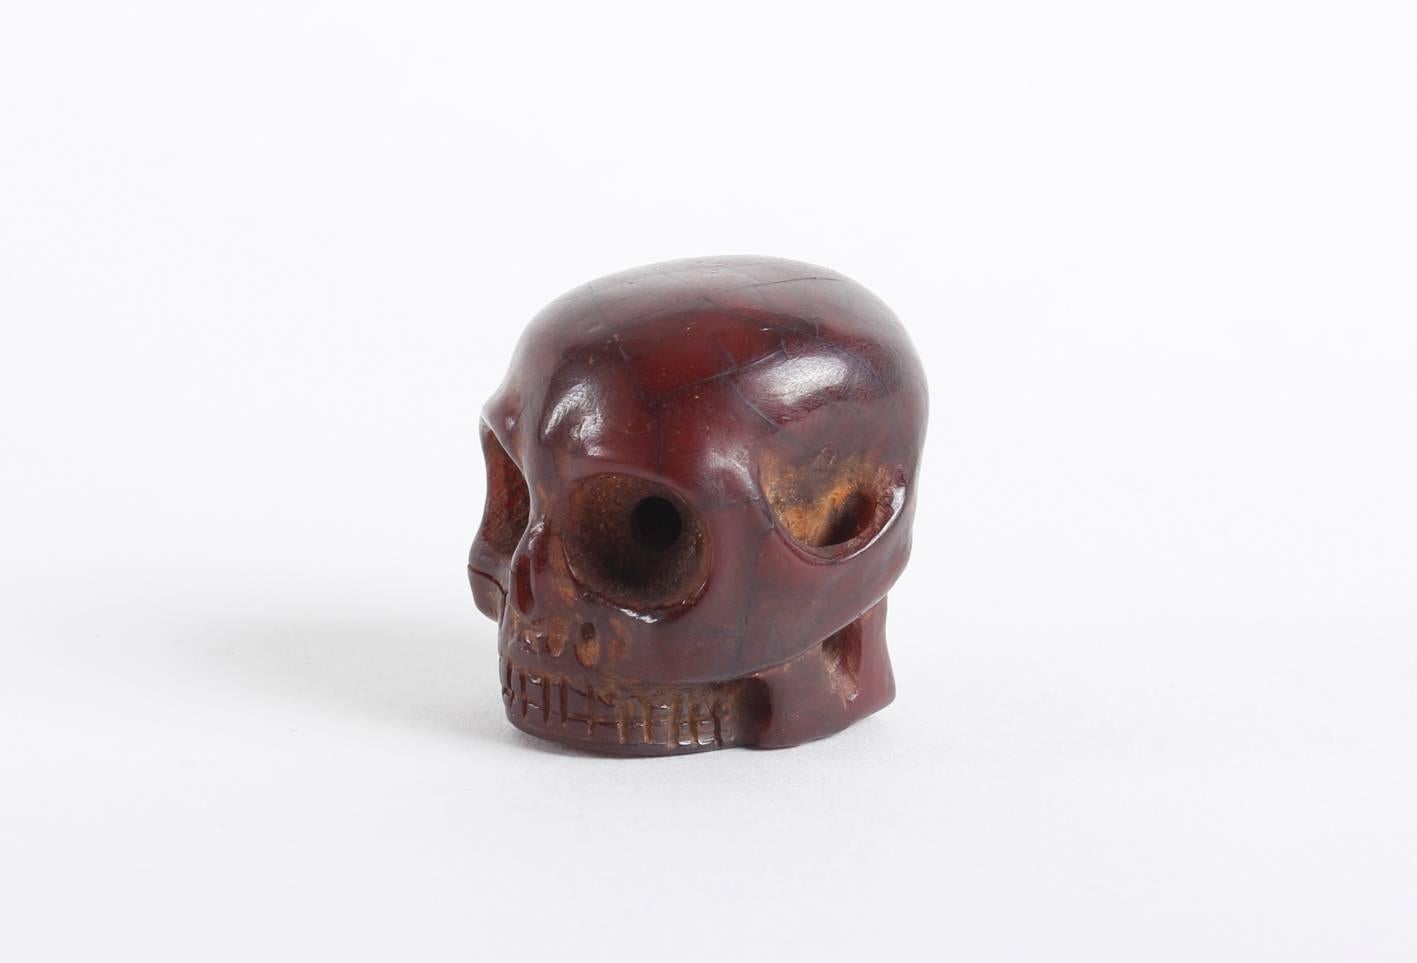 Early 19th Century Rare and Decorative 18th or 19th Century Japanese Amber Skull For Sale